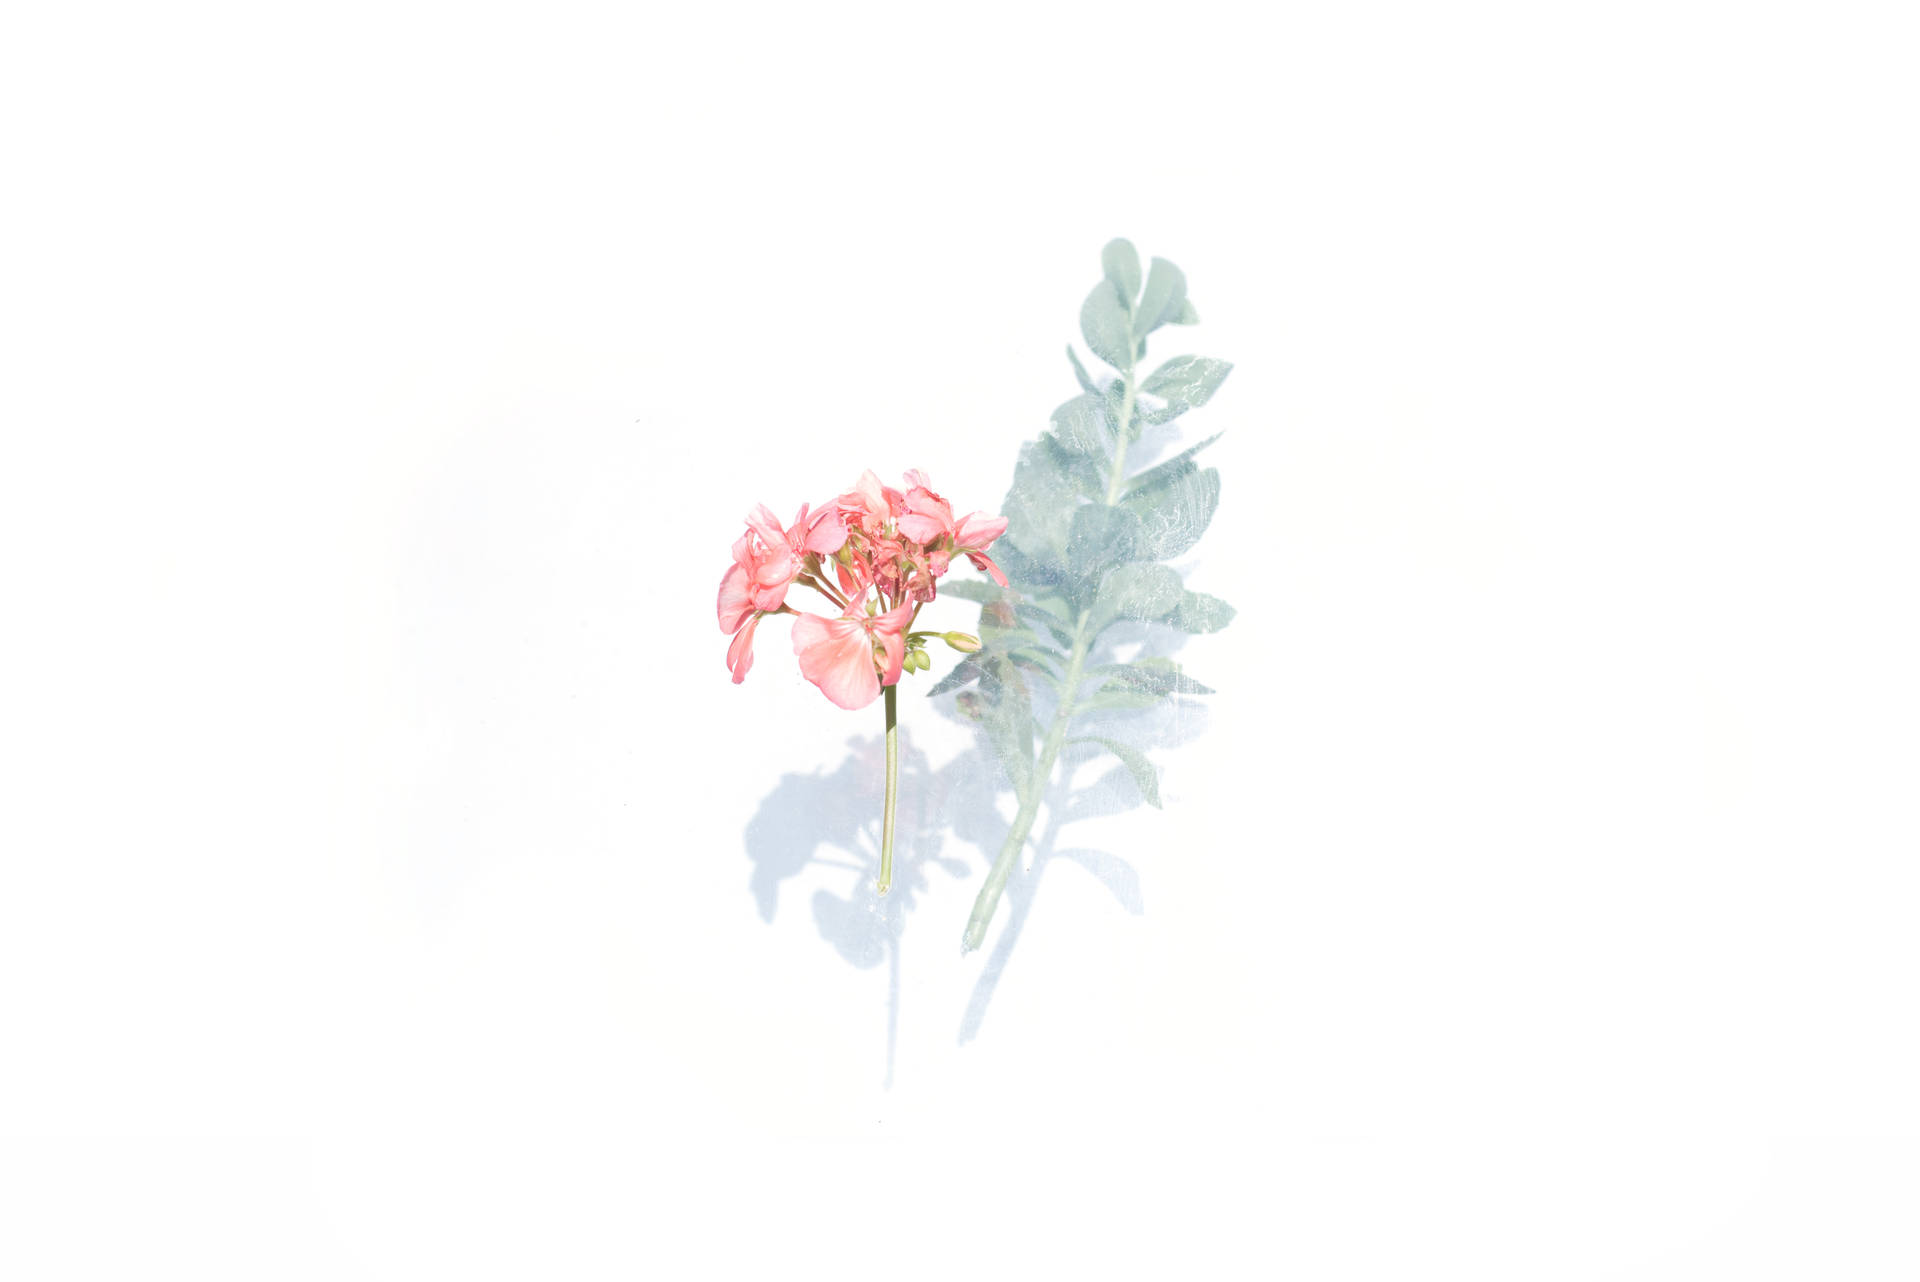 6016X4016 Floral Wallpaper and Background